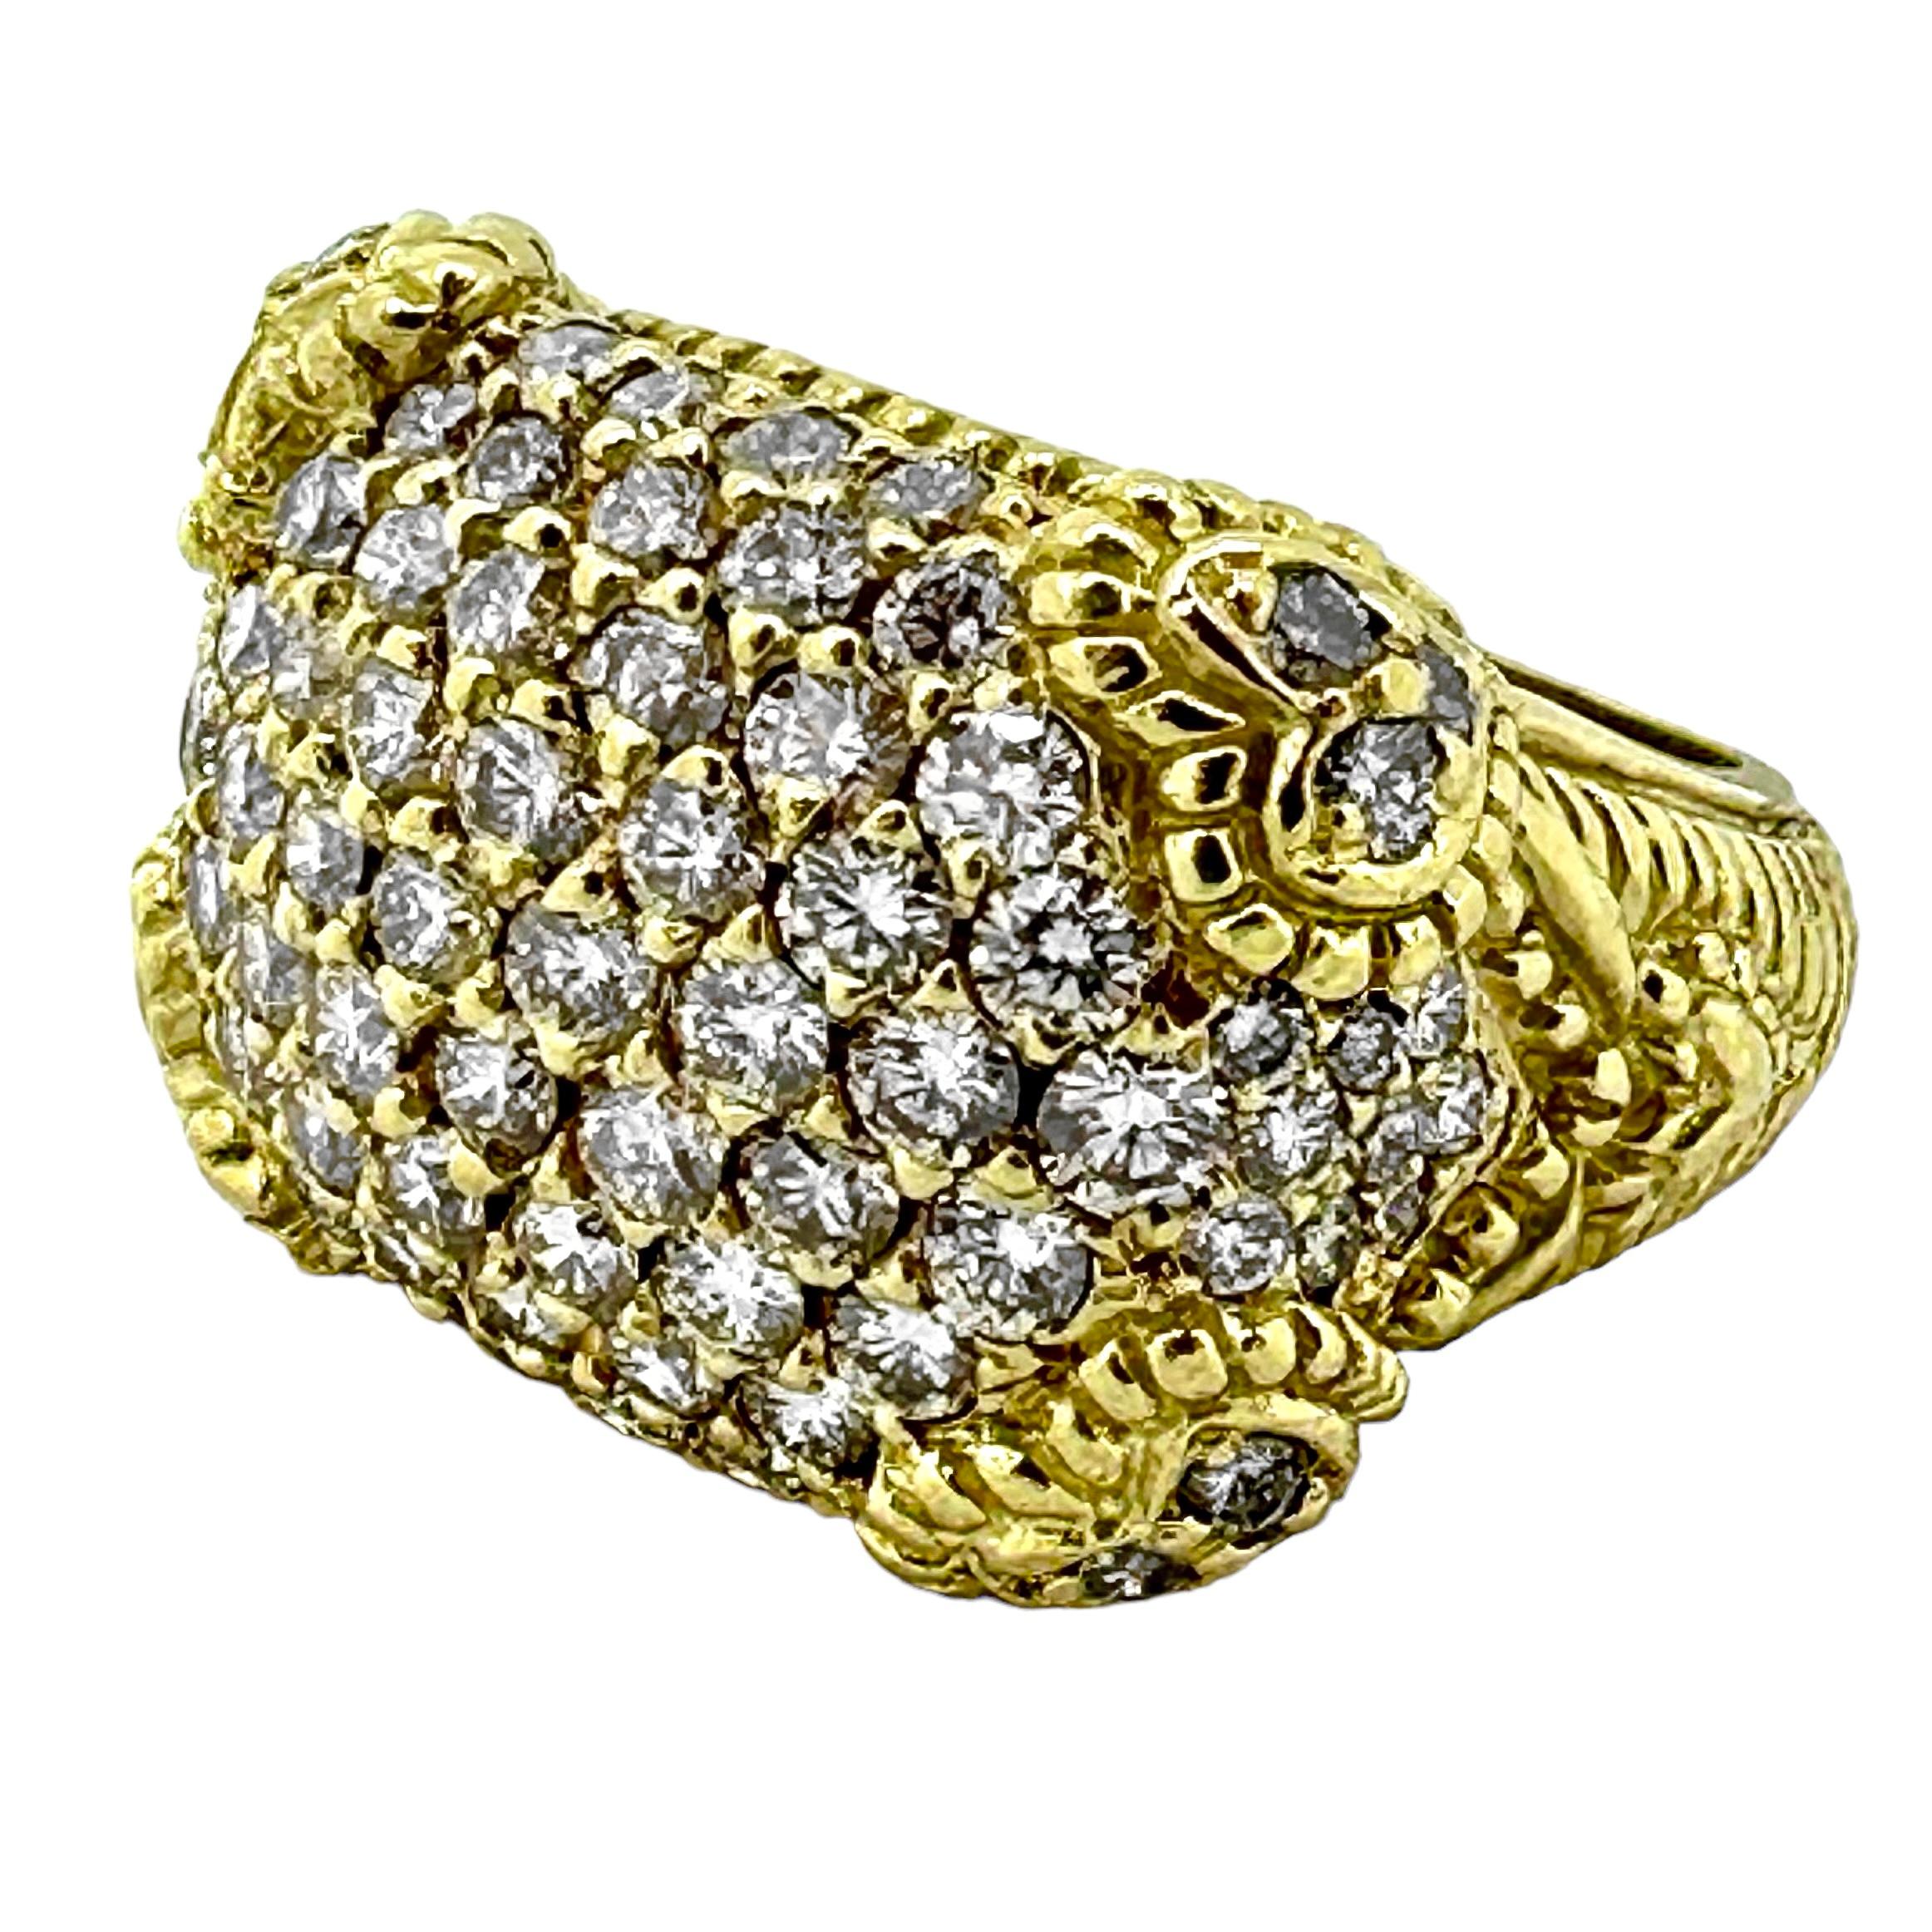 Brilliant Cut Dazzling Judith Ripka 18K Yellow Gold and Pave Set Diamond Cocktail Ring For Sale